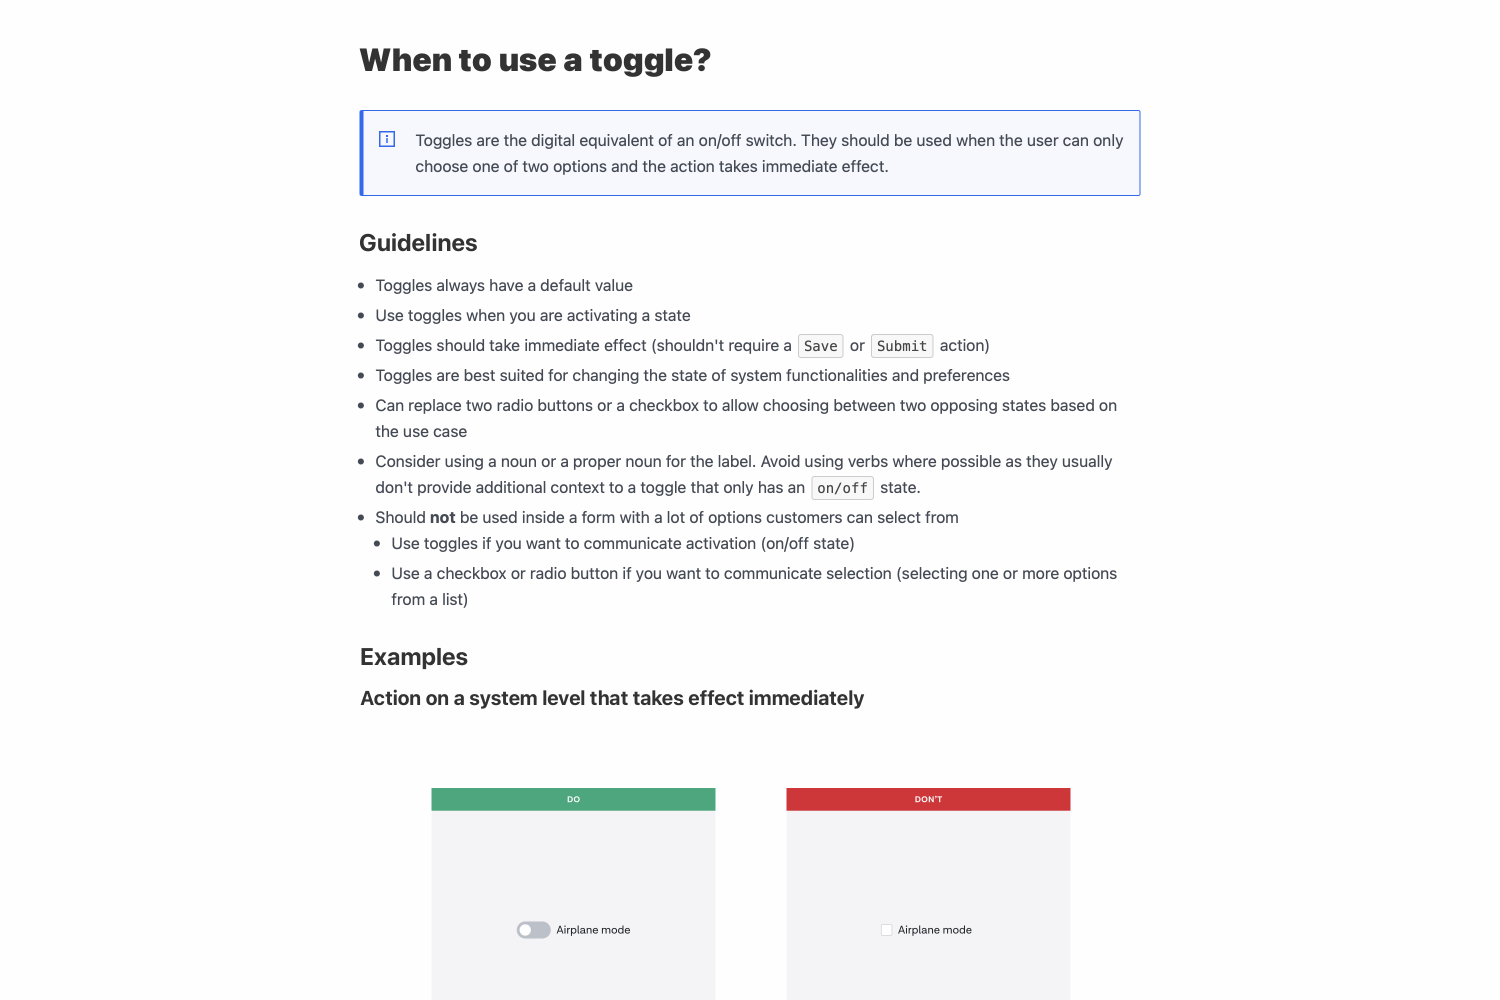 Screenshot from the Bliss Pattern Documentation, showing guidelines around the usage of toggles.